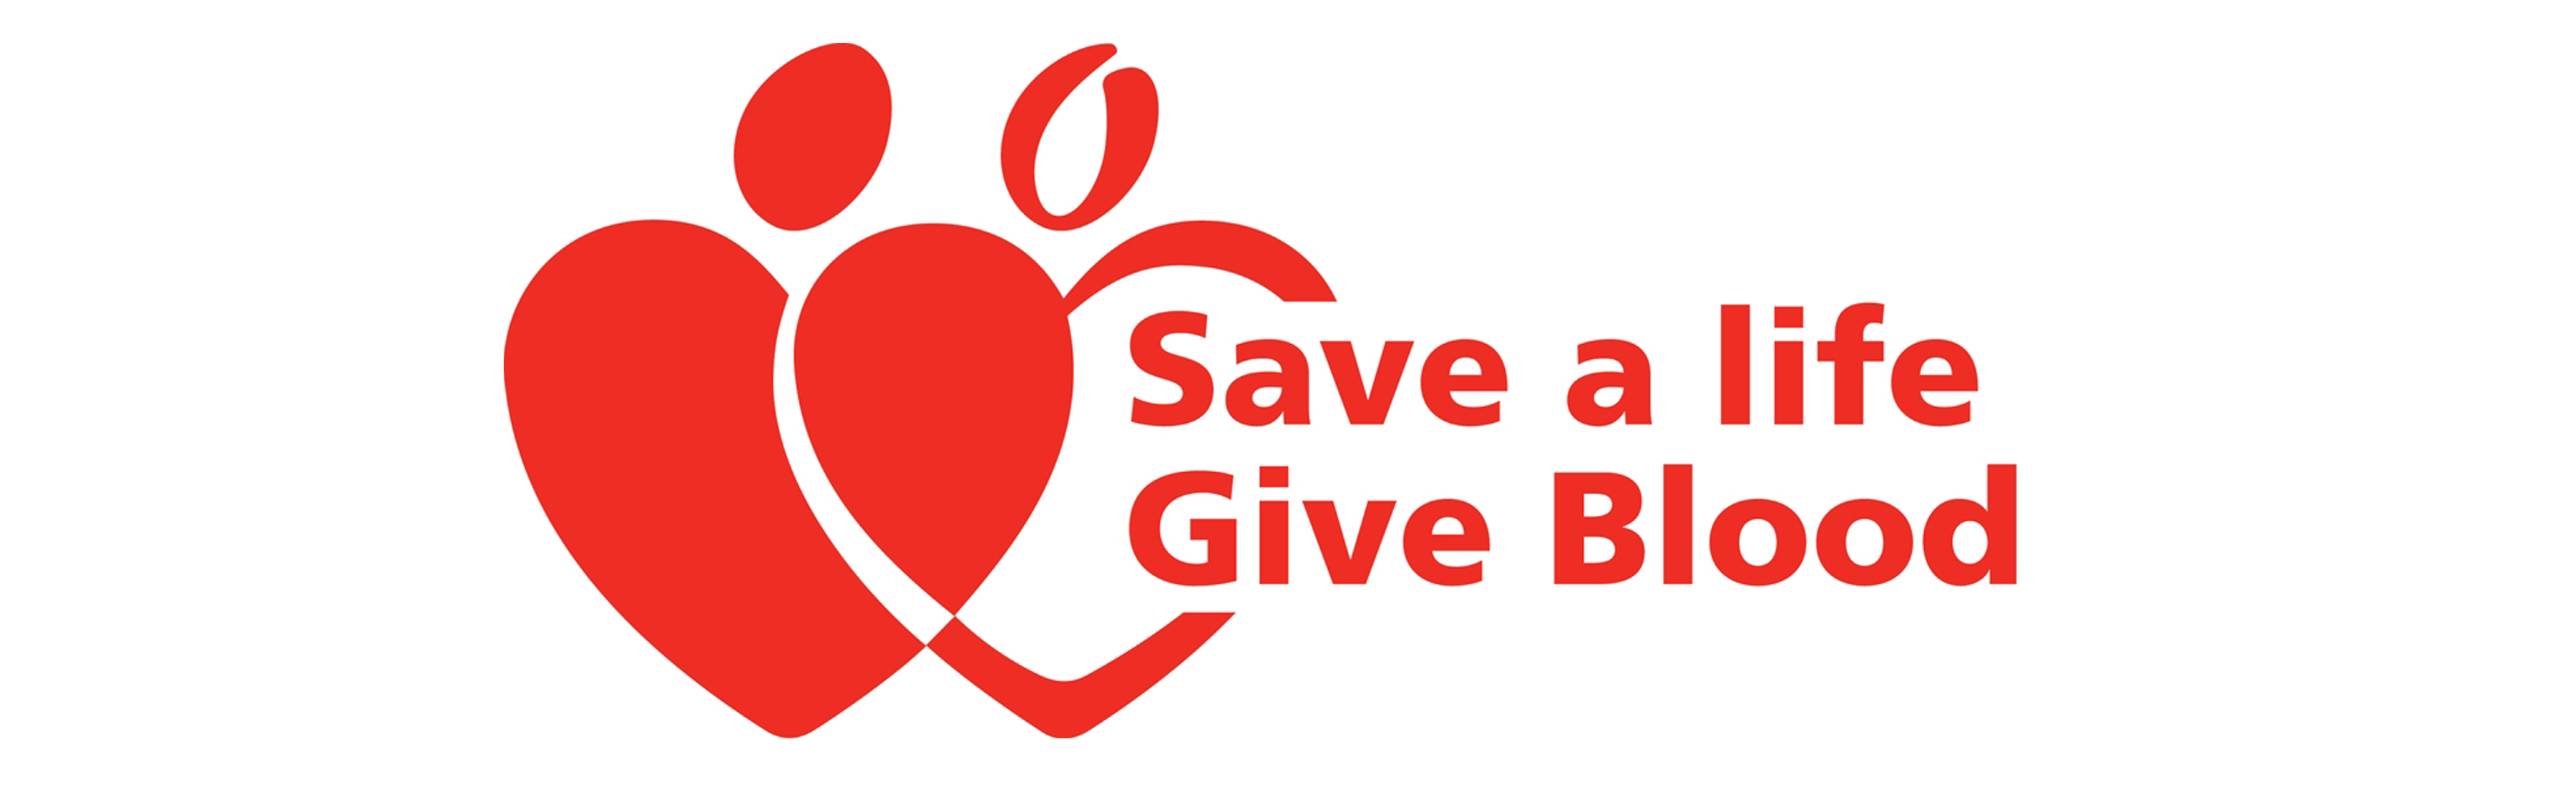 Enfield Backs Blood Donation Campaign - Blood Donation, Transparent background PNG HD thumbnail